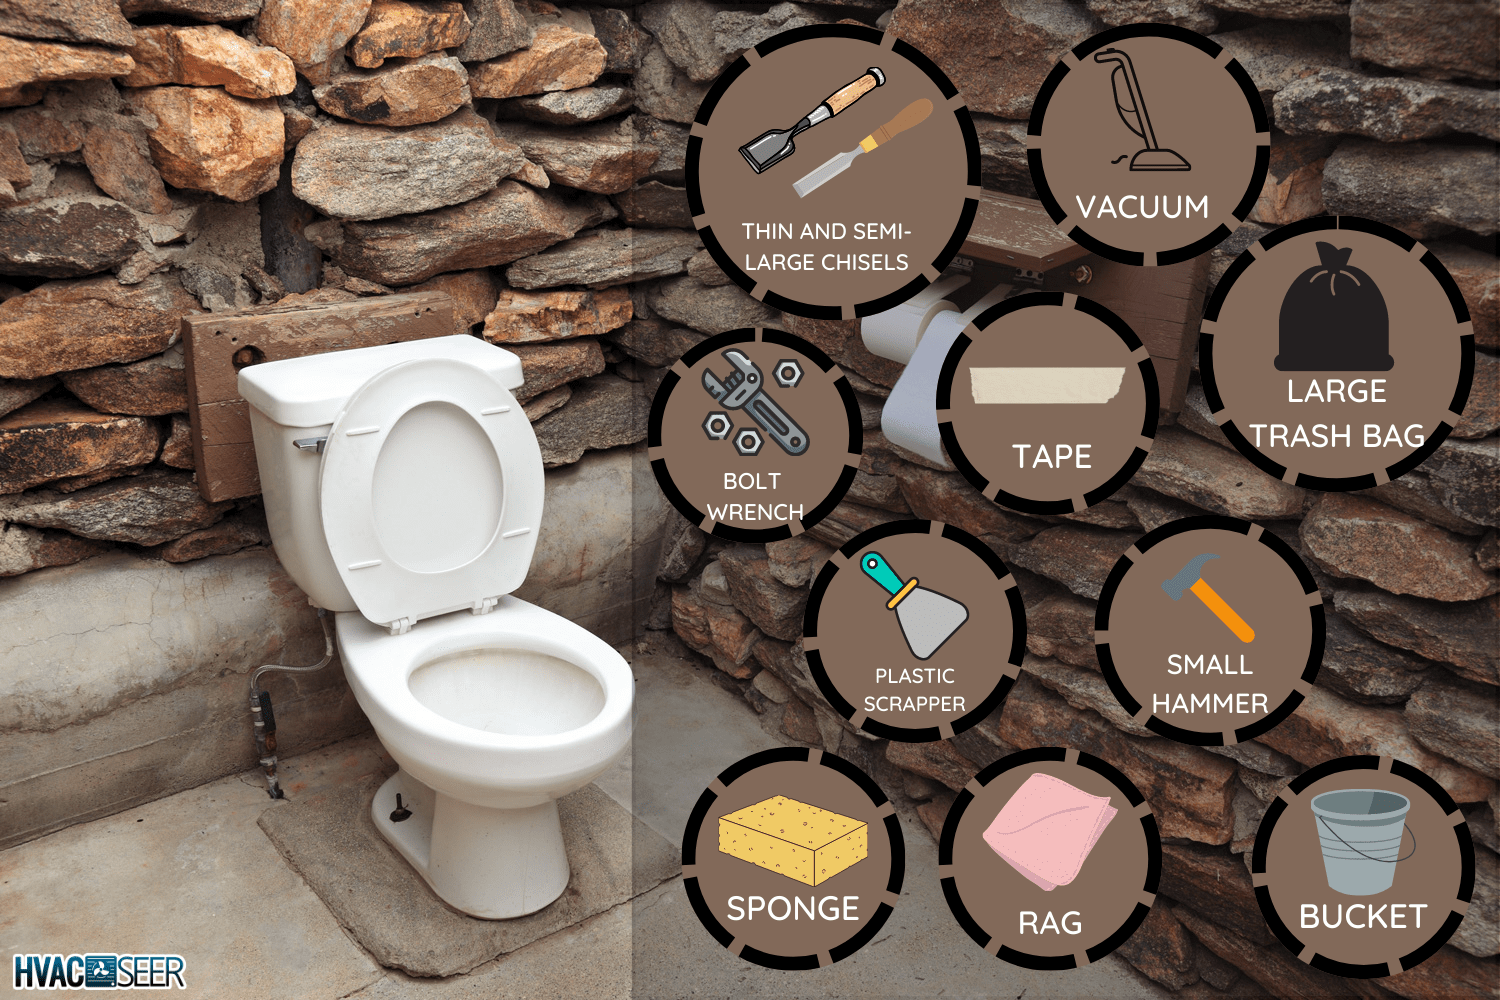 Open air toilet in room with stacked rock walls and cement floor. Toilet paper rolls on the right - Toilet Cemented To Floor - How To Remove